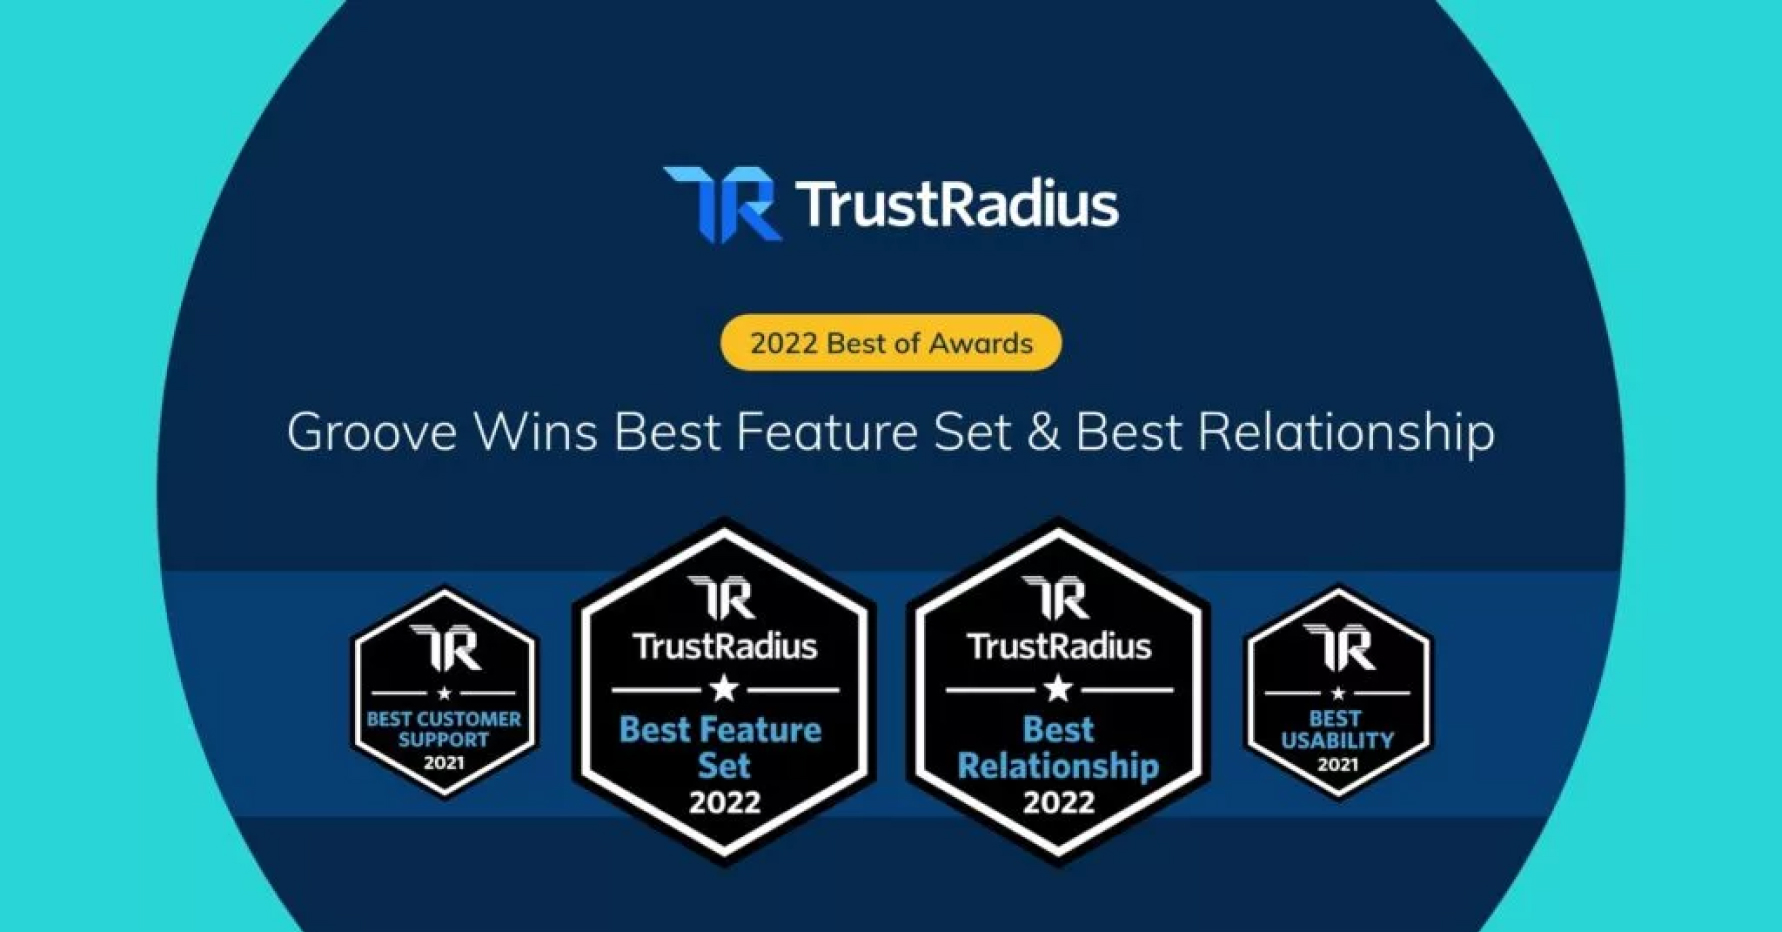 Image with TrustRadius logo and awards for Best Customer Support 2021, Best Feature Set 2022, Best Relationship 2022, and Best Usability 2021